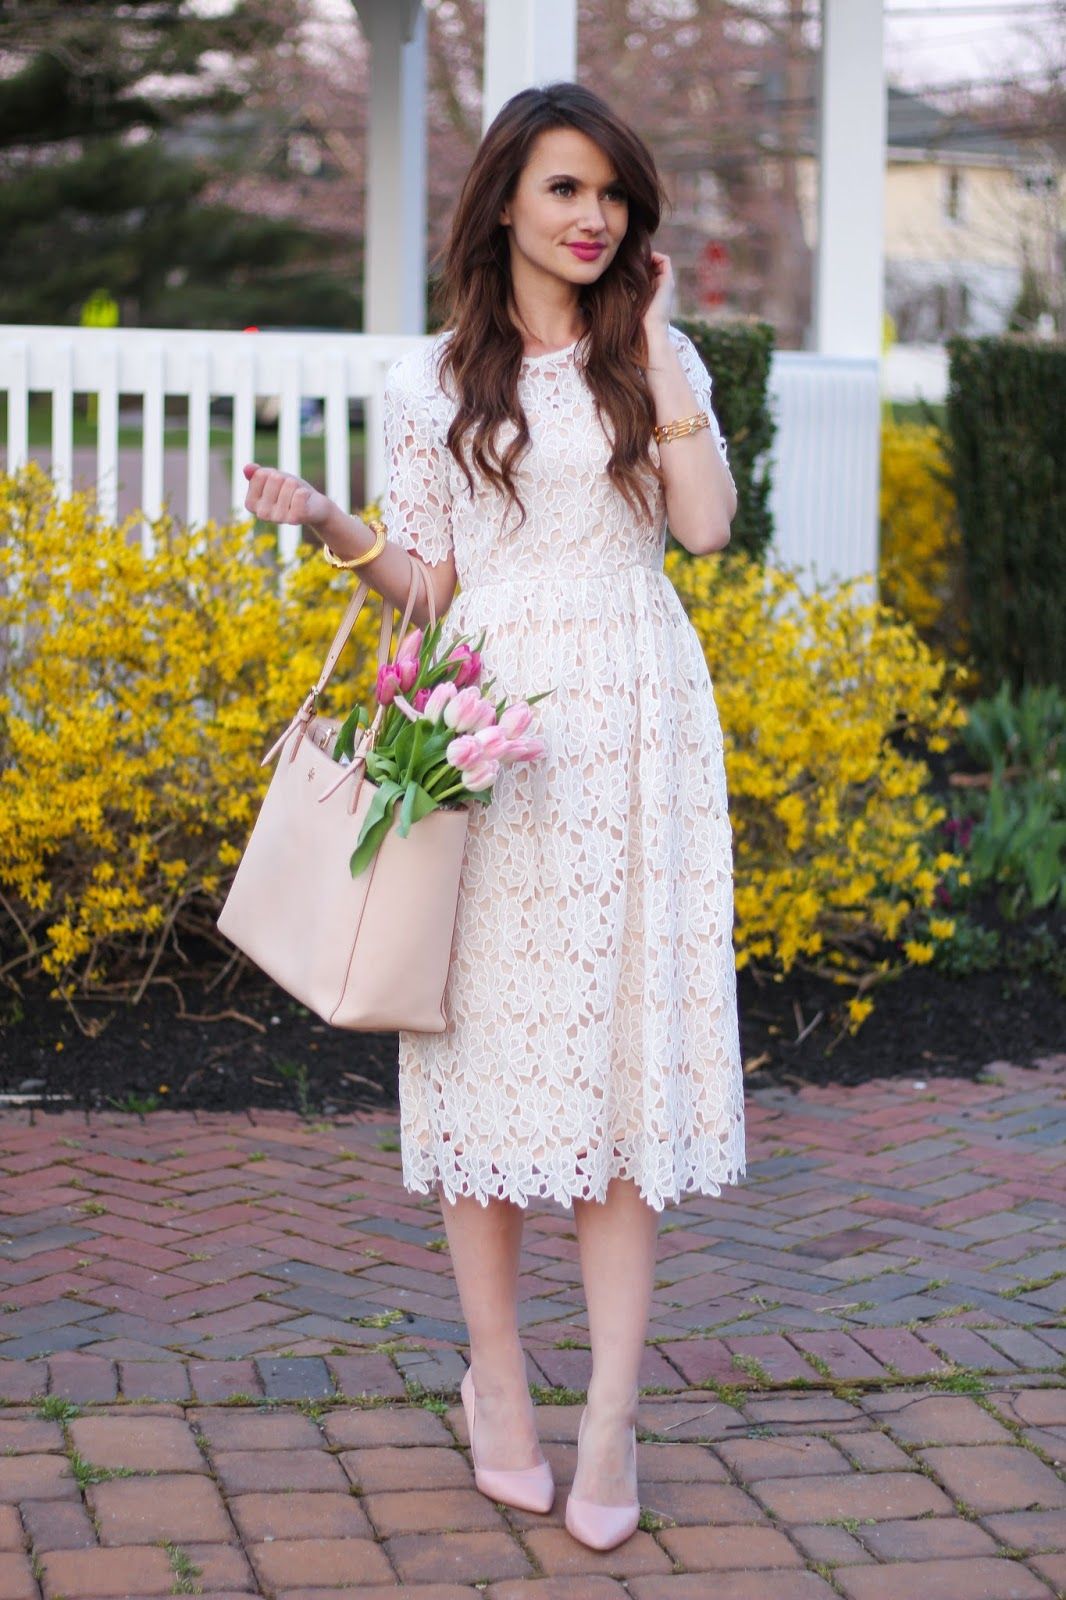 STYLISH EASTER DRESSES YOU CAN WEAR ALL SPRING